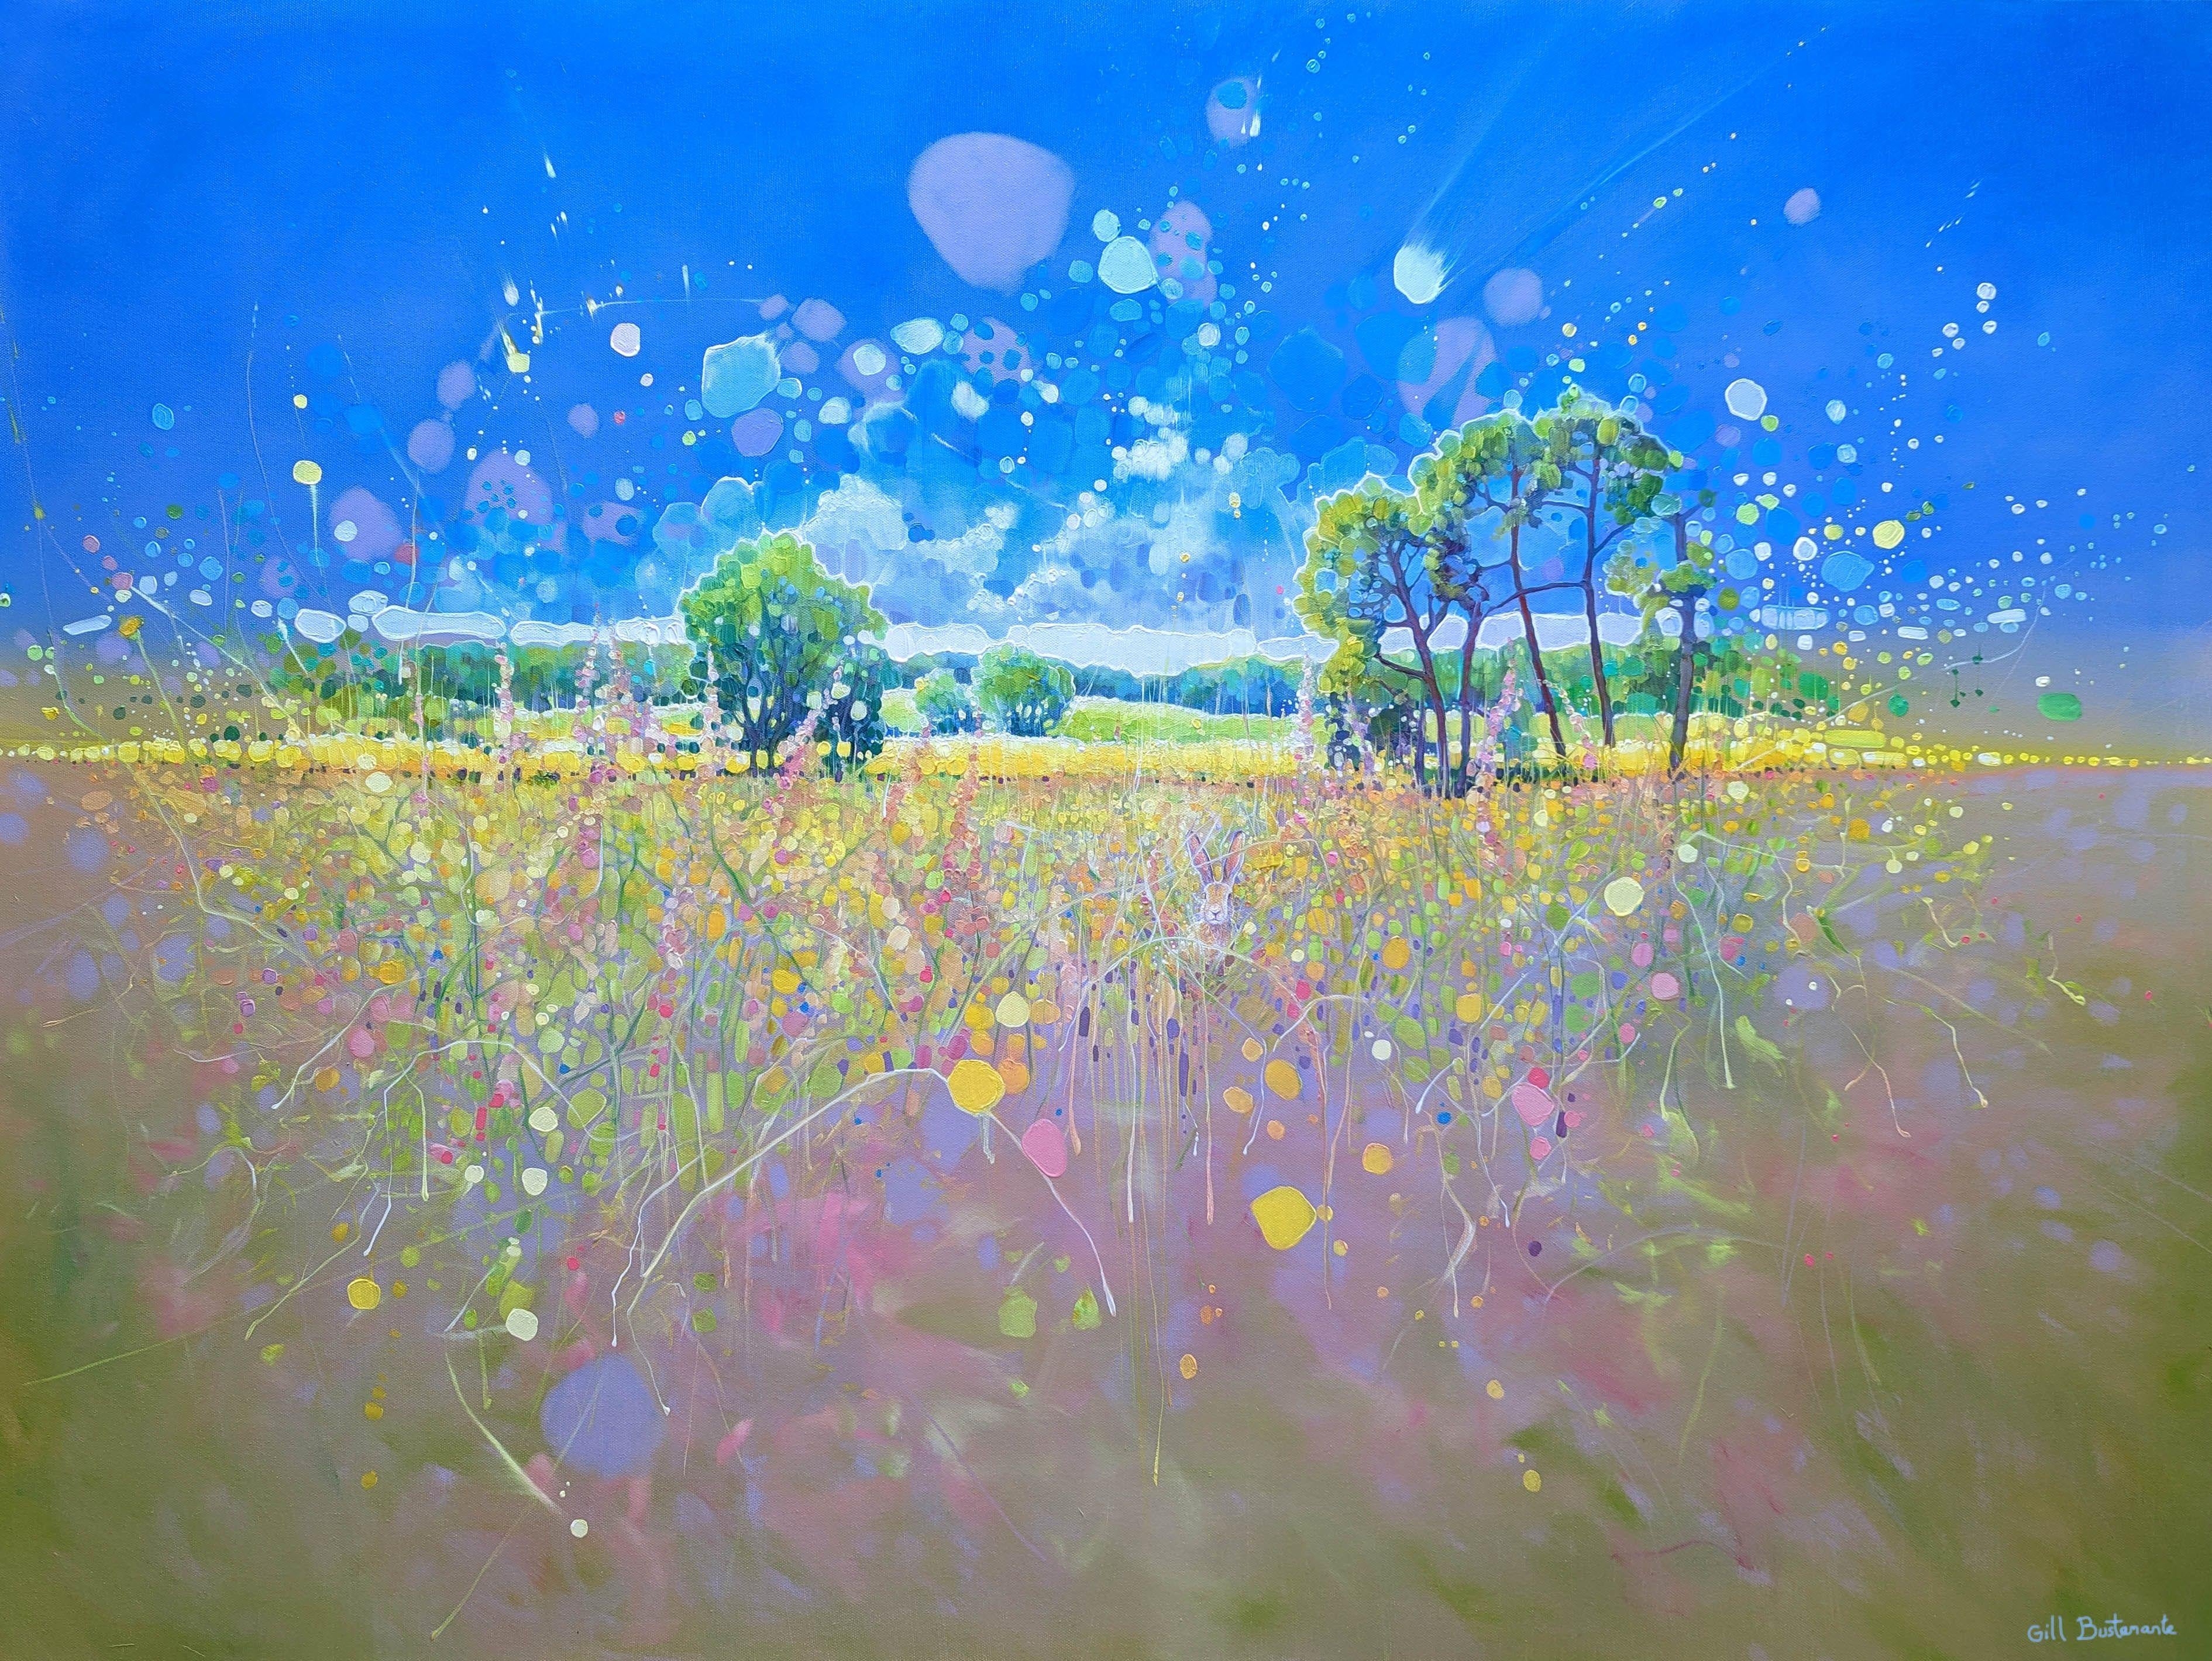 Transcendent Springtime is an exuberant semi-abstract painting of a springtime landscape with a brown hare in a wildflower meadow. It is 48x36 inches. The painting shows an ethereal scene whereby lots of particles, of various sizes, move in towards